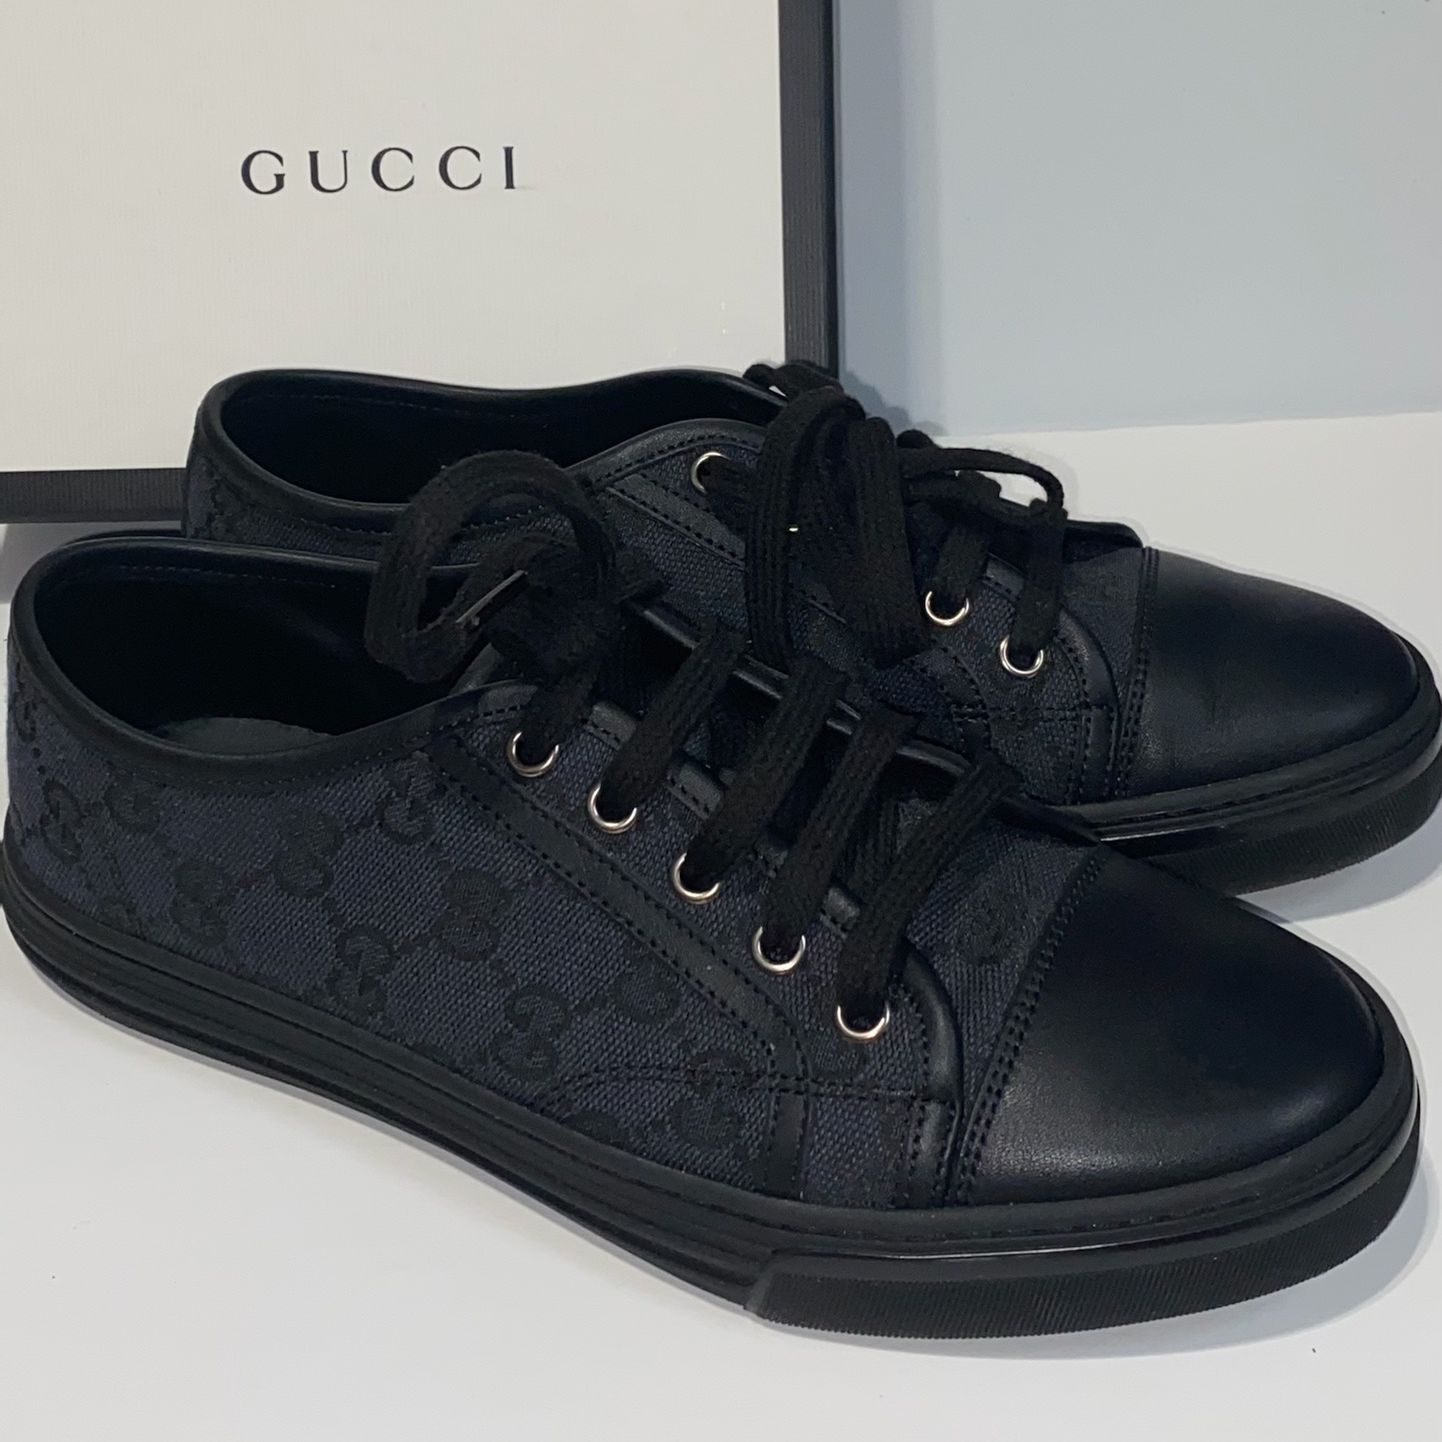 Gucci Sneakers for Sale in Elmwood Park, NJ - OfferUp